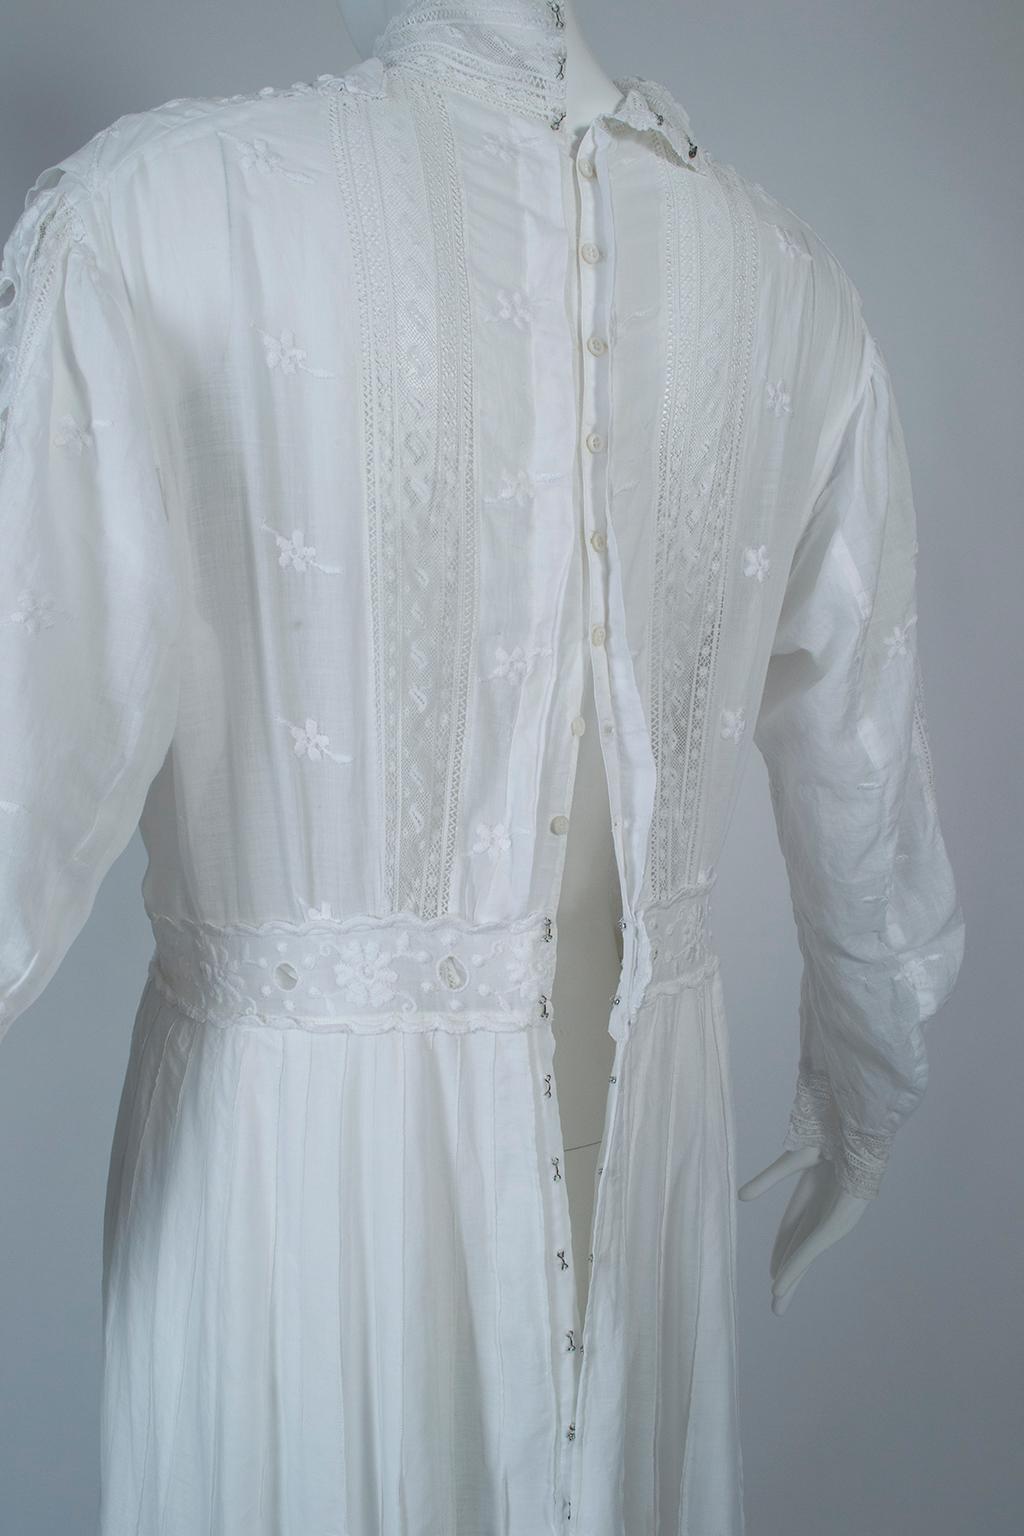 Victorian White Eyelet and Lace Shoulder Pleat Afternoon Tea Dress - M, 1880s 8